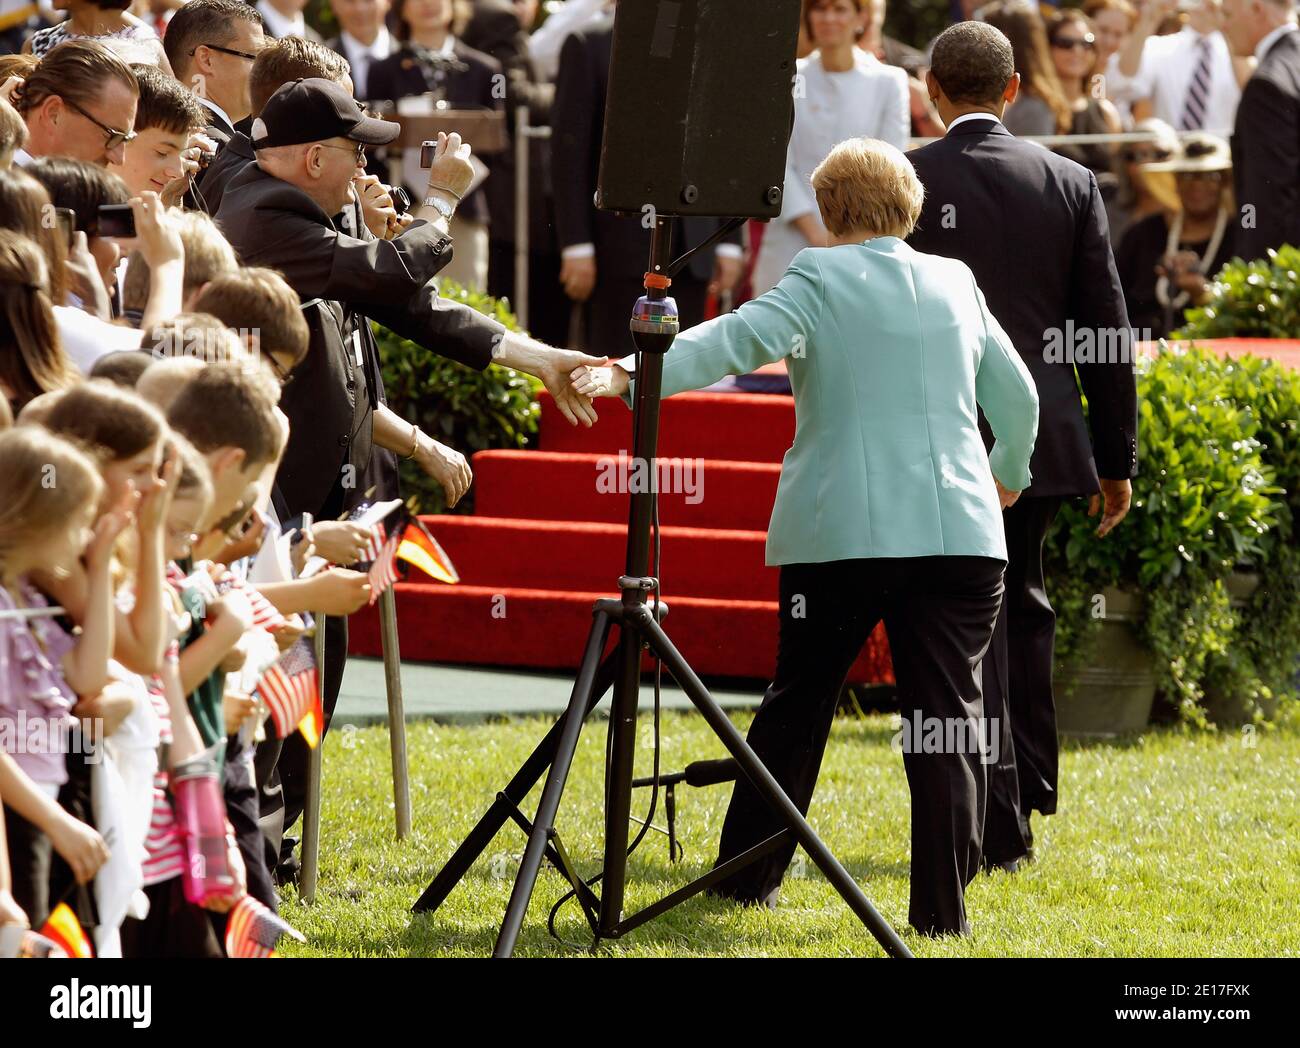 German Chancellor Angela Merkel (C) and U.S. President Barack Obama (R) greet guests on their way to the stage on the South Lawn of the White House during a ceremony in Washington, DC on June 7, 2011. This is the first official visit by a European leader to the White House since Obama became president. Merkel will be presented with the 2010 Medal of Freedom at a state dinner tonight. Photo by Chip Somodevilla/Pool/ABACAPRESS.COM Stock Photo